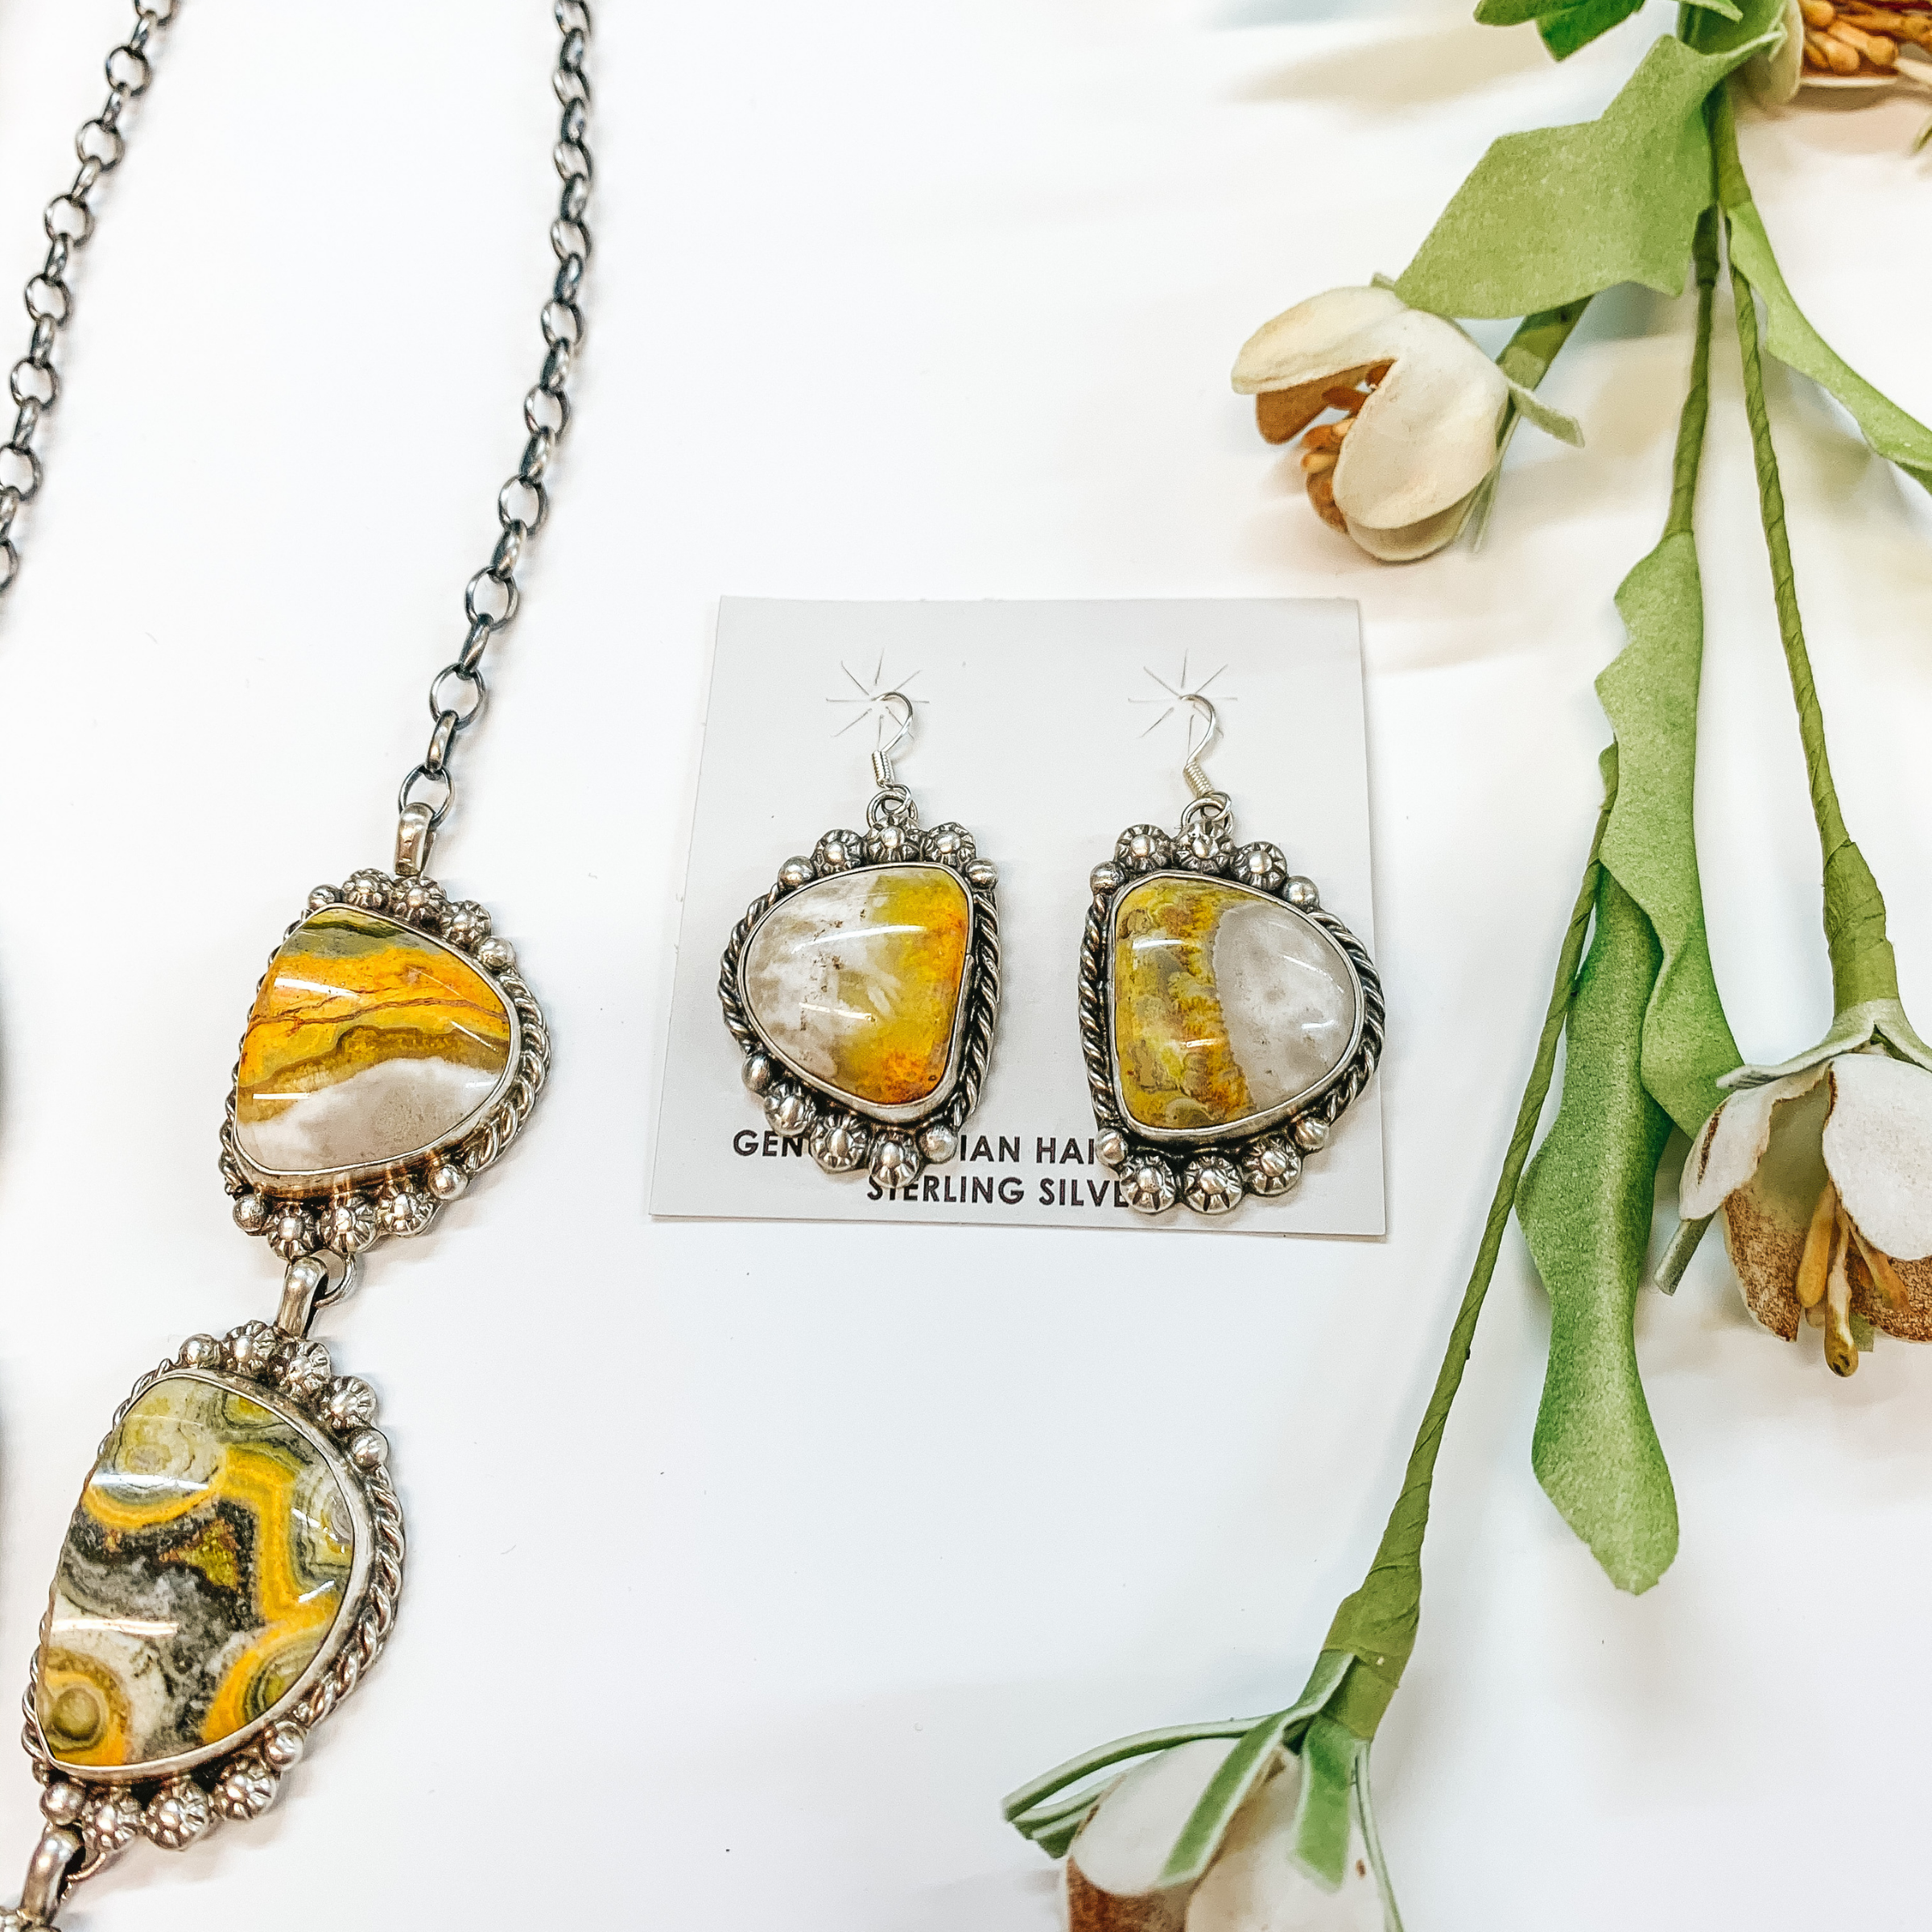 Betta Lee | Navajo Handmade Sterling Silver & Bumble Bee Jasper Necklace + Matching Earrings - Giddy Up Glamour Boutique